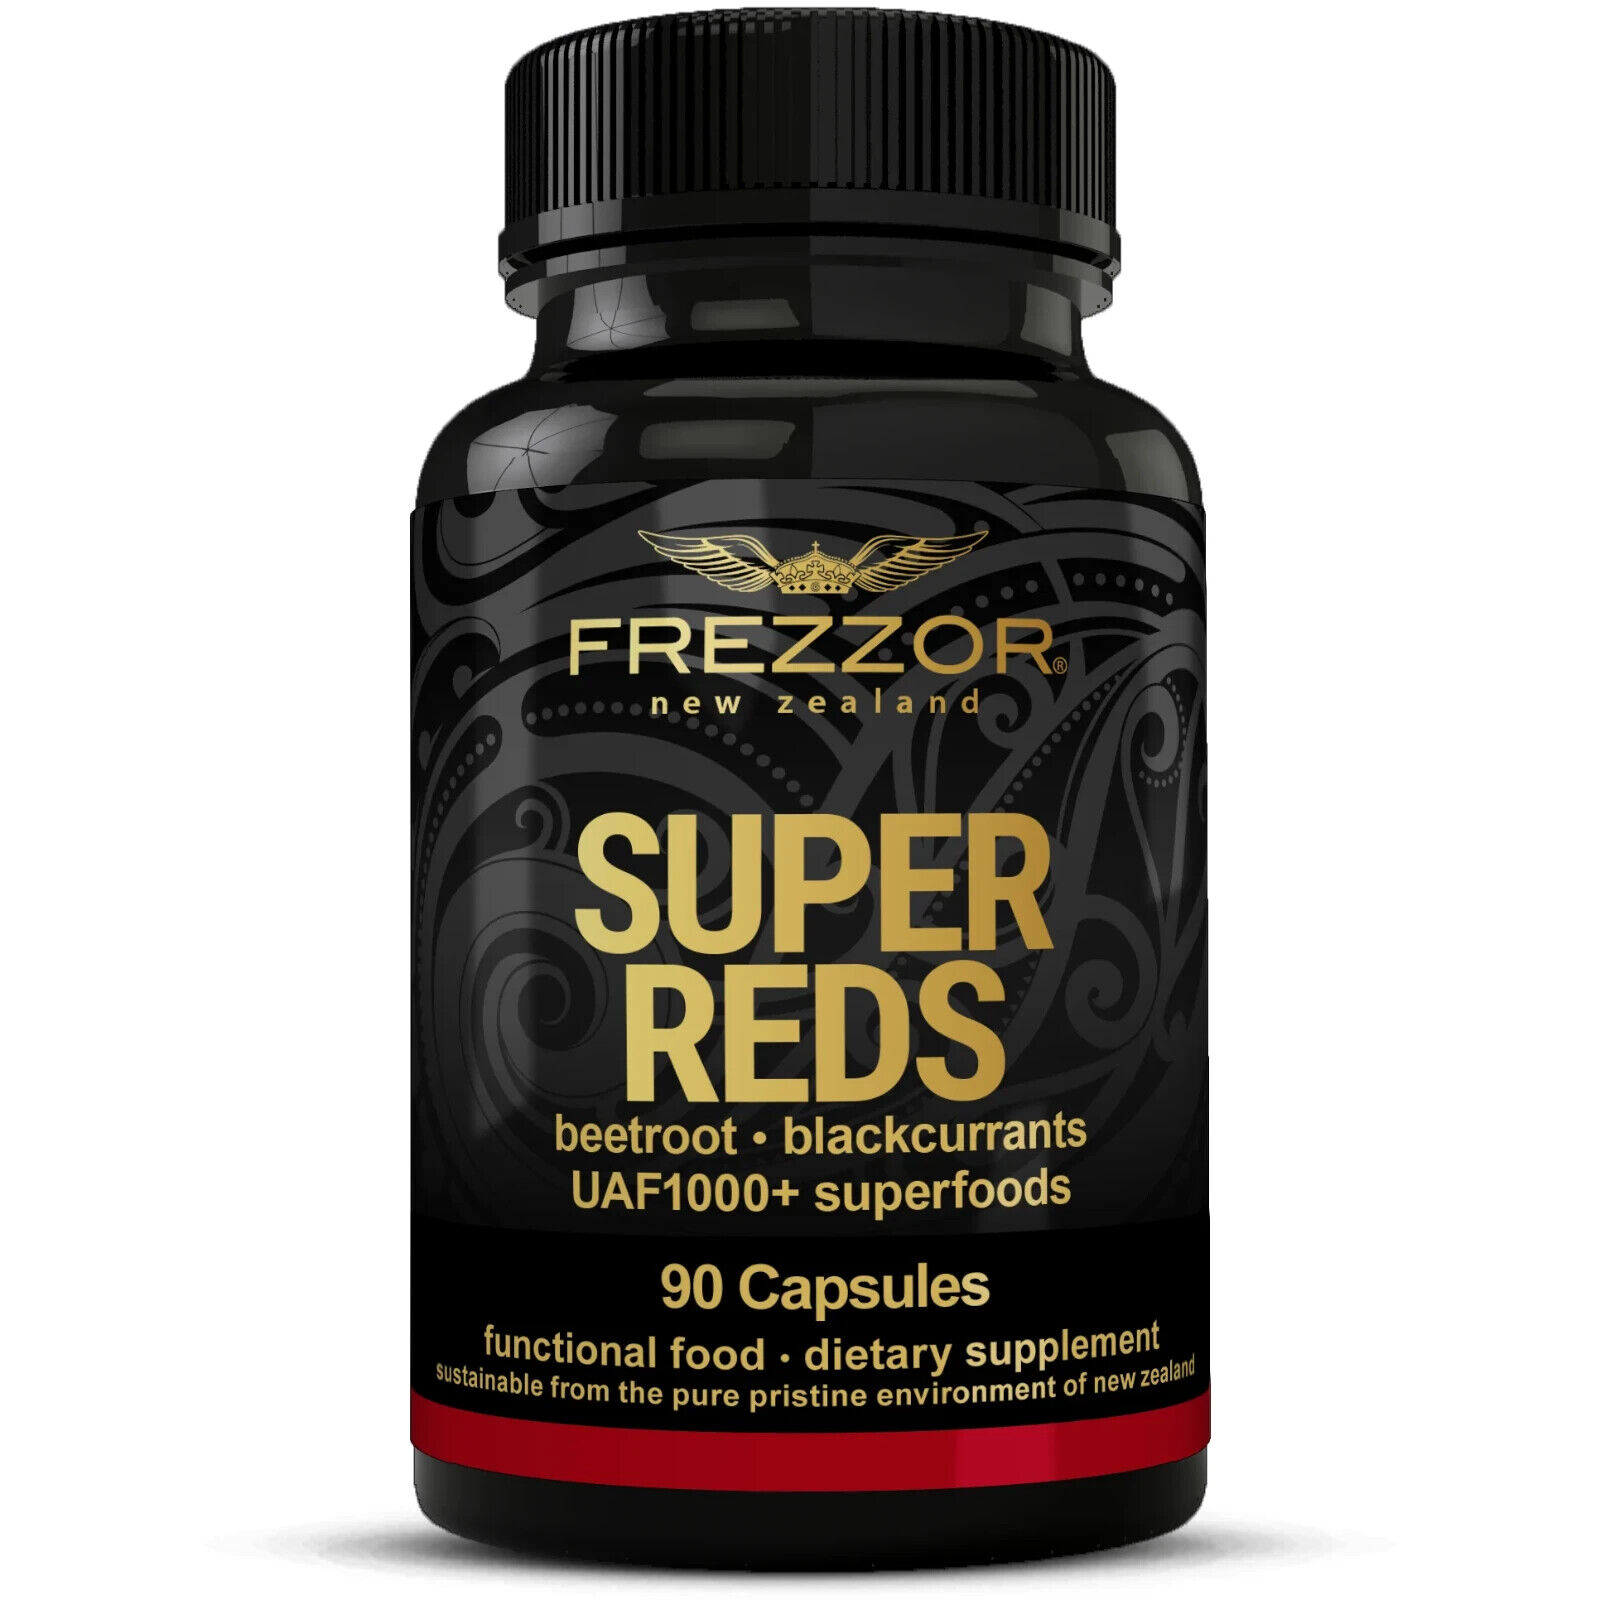 FREZZOR Super Reds Capsules, All-Natural New Zealand Red Superfood 1 Pack